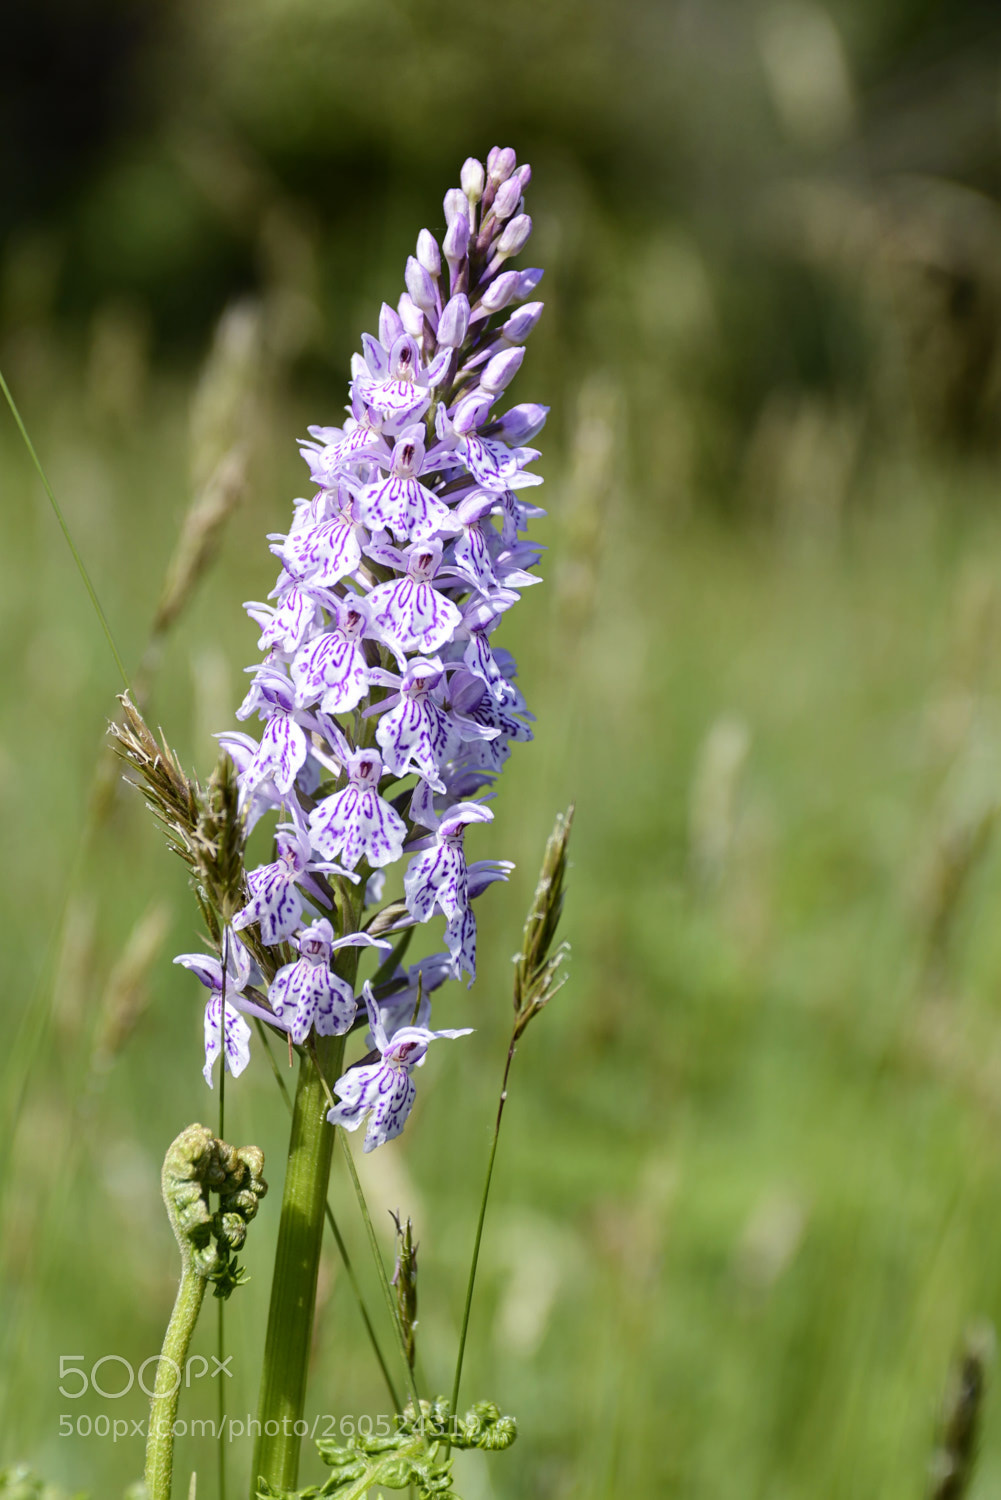 Nikon D800 sample photo. Common spotted-orchid (dactylorhiza fuchsii) photography